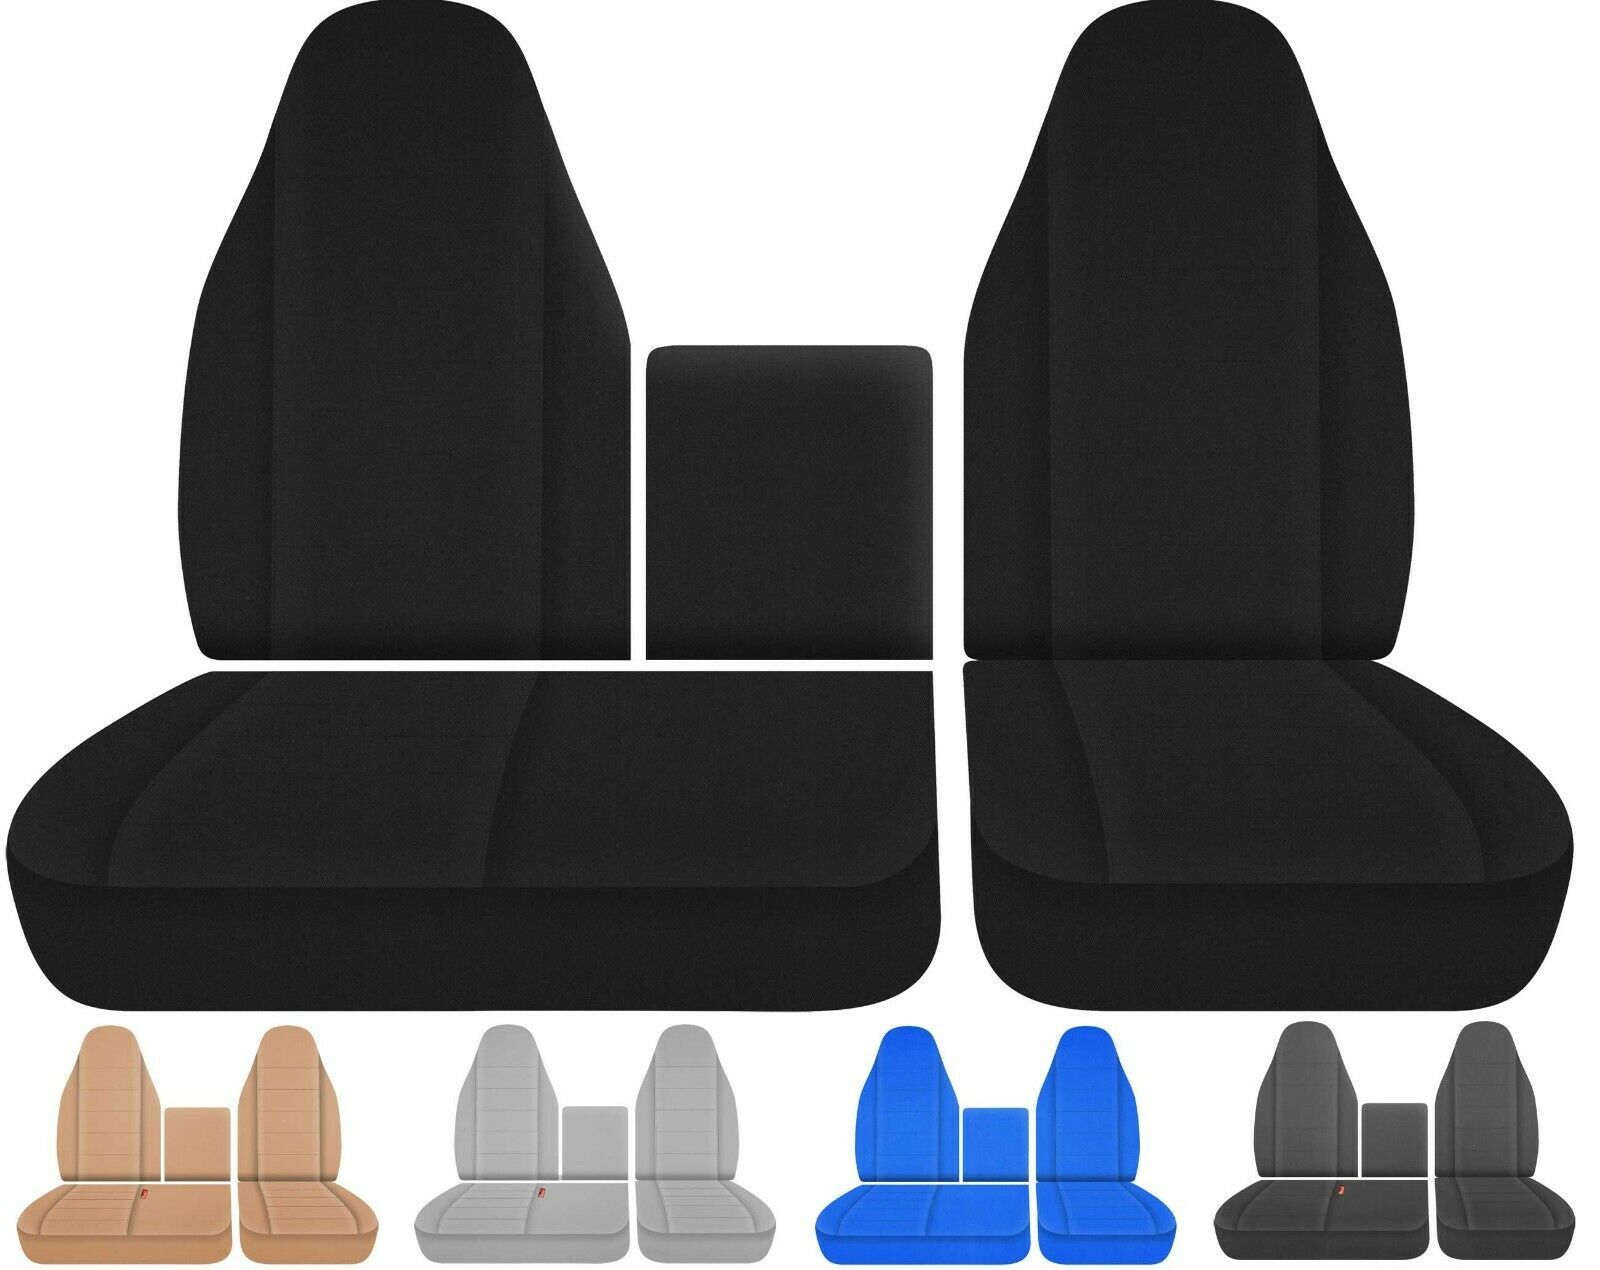 Primary image for Front truck seat covers Fits 1996-2021 Isuzu N Series NRR NQR NPR ,Made to fit